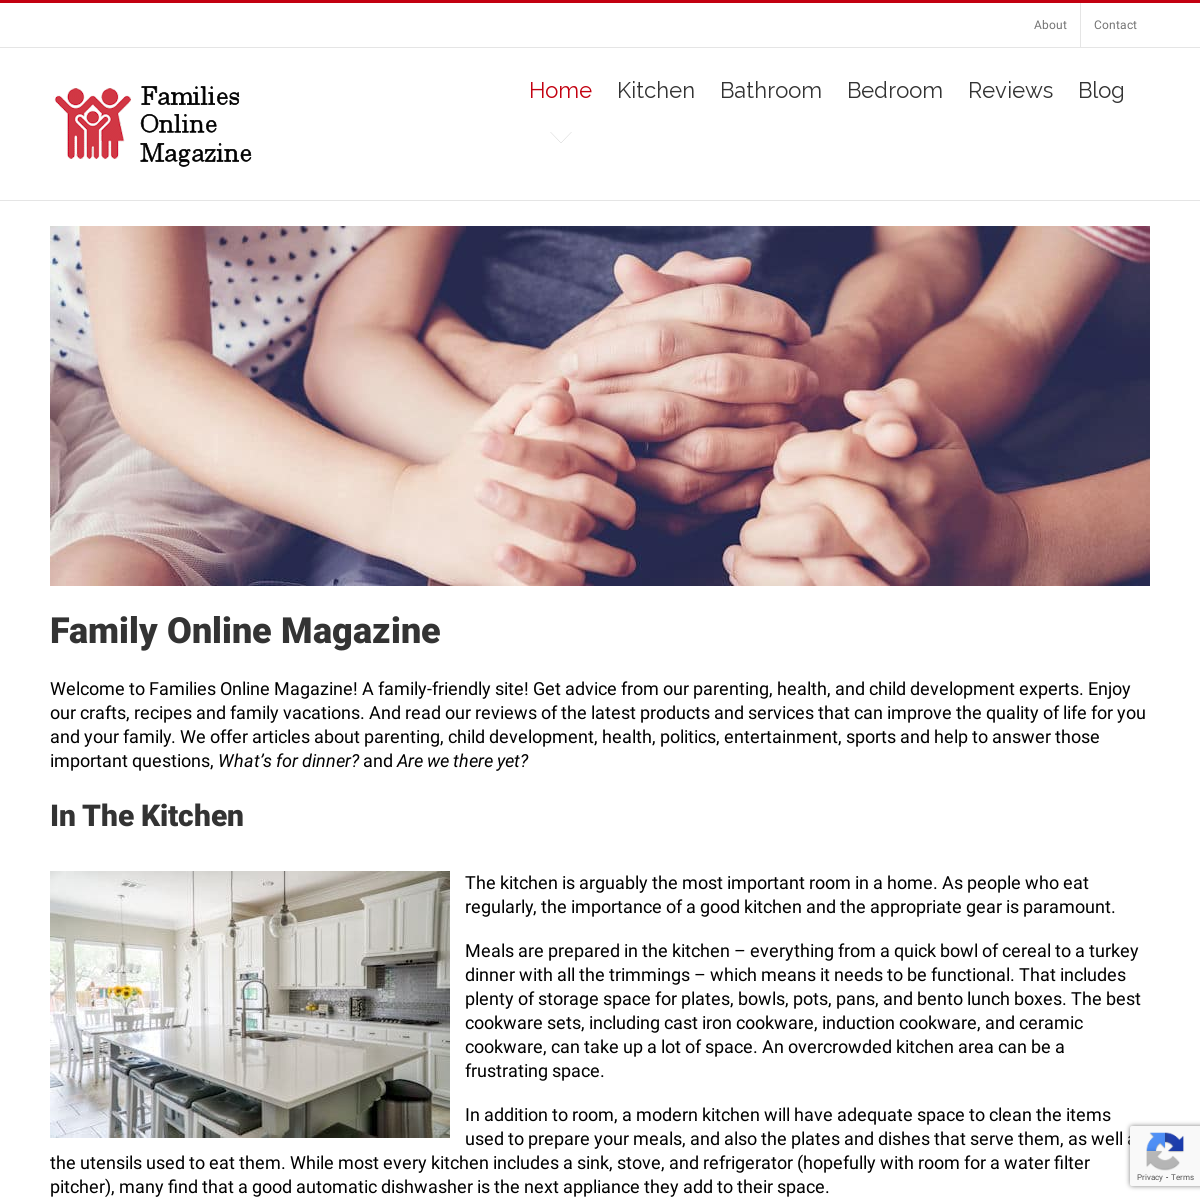 A complete backup of familiesonlinemagazine.com